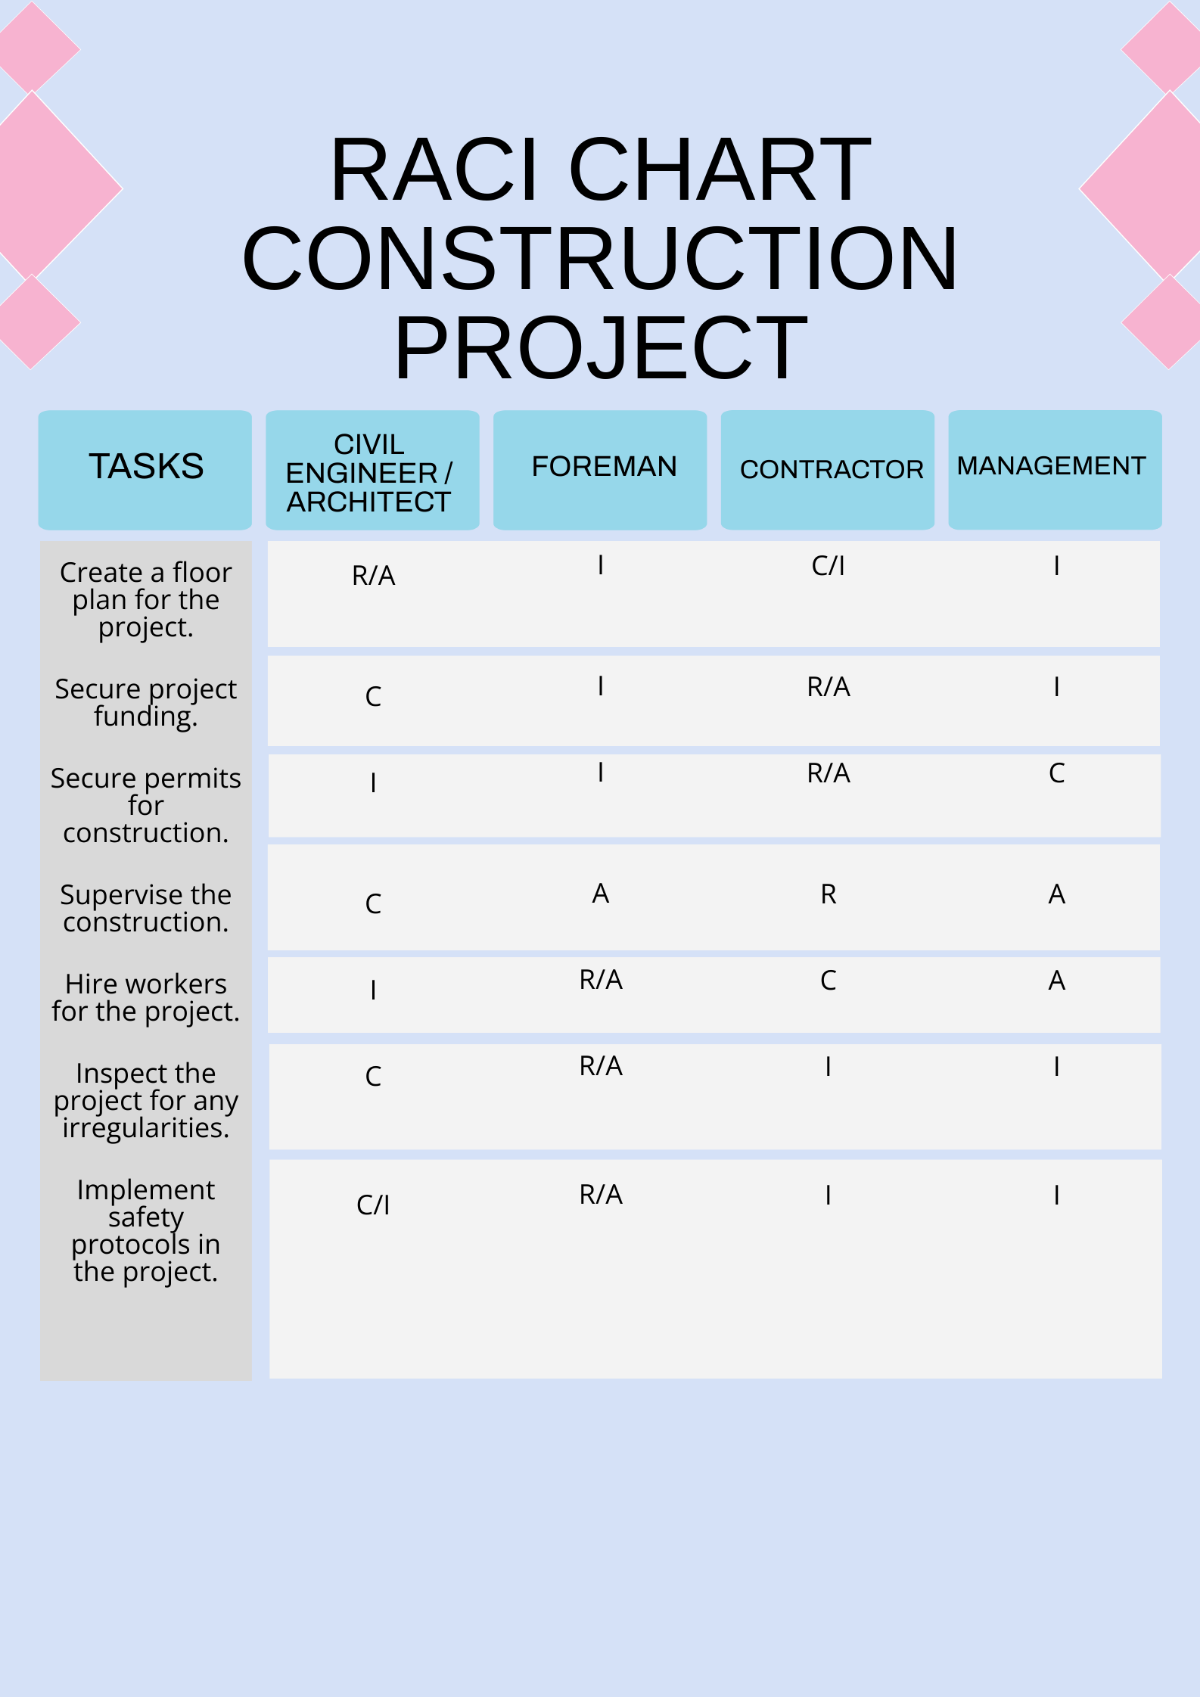 RACI Chart Construction Project Template